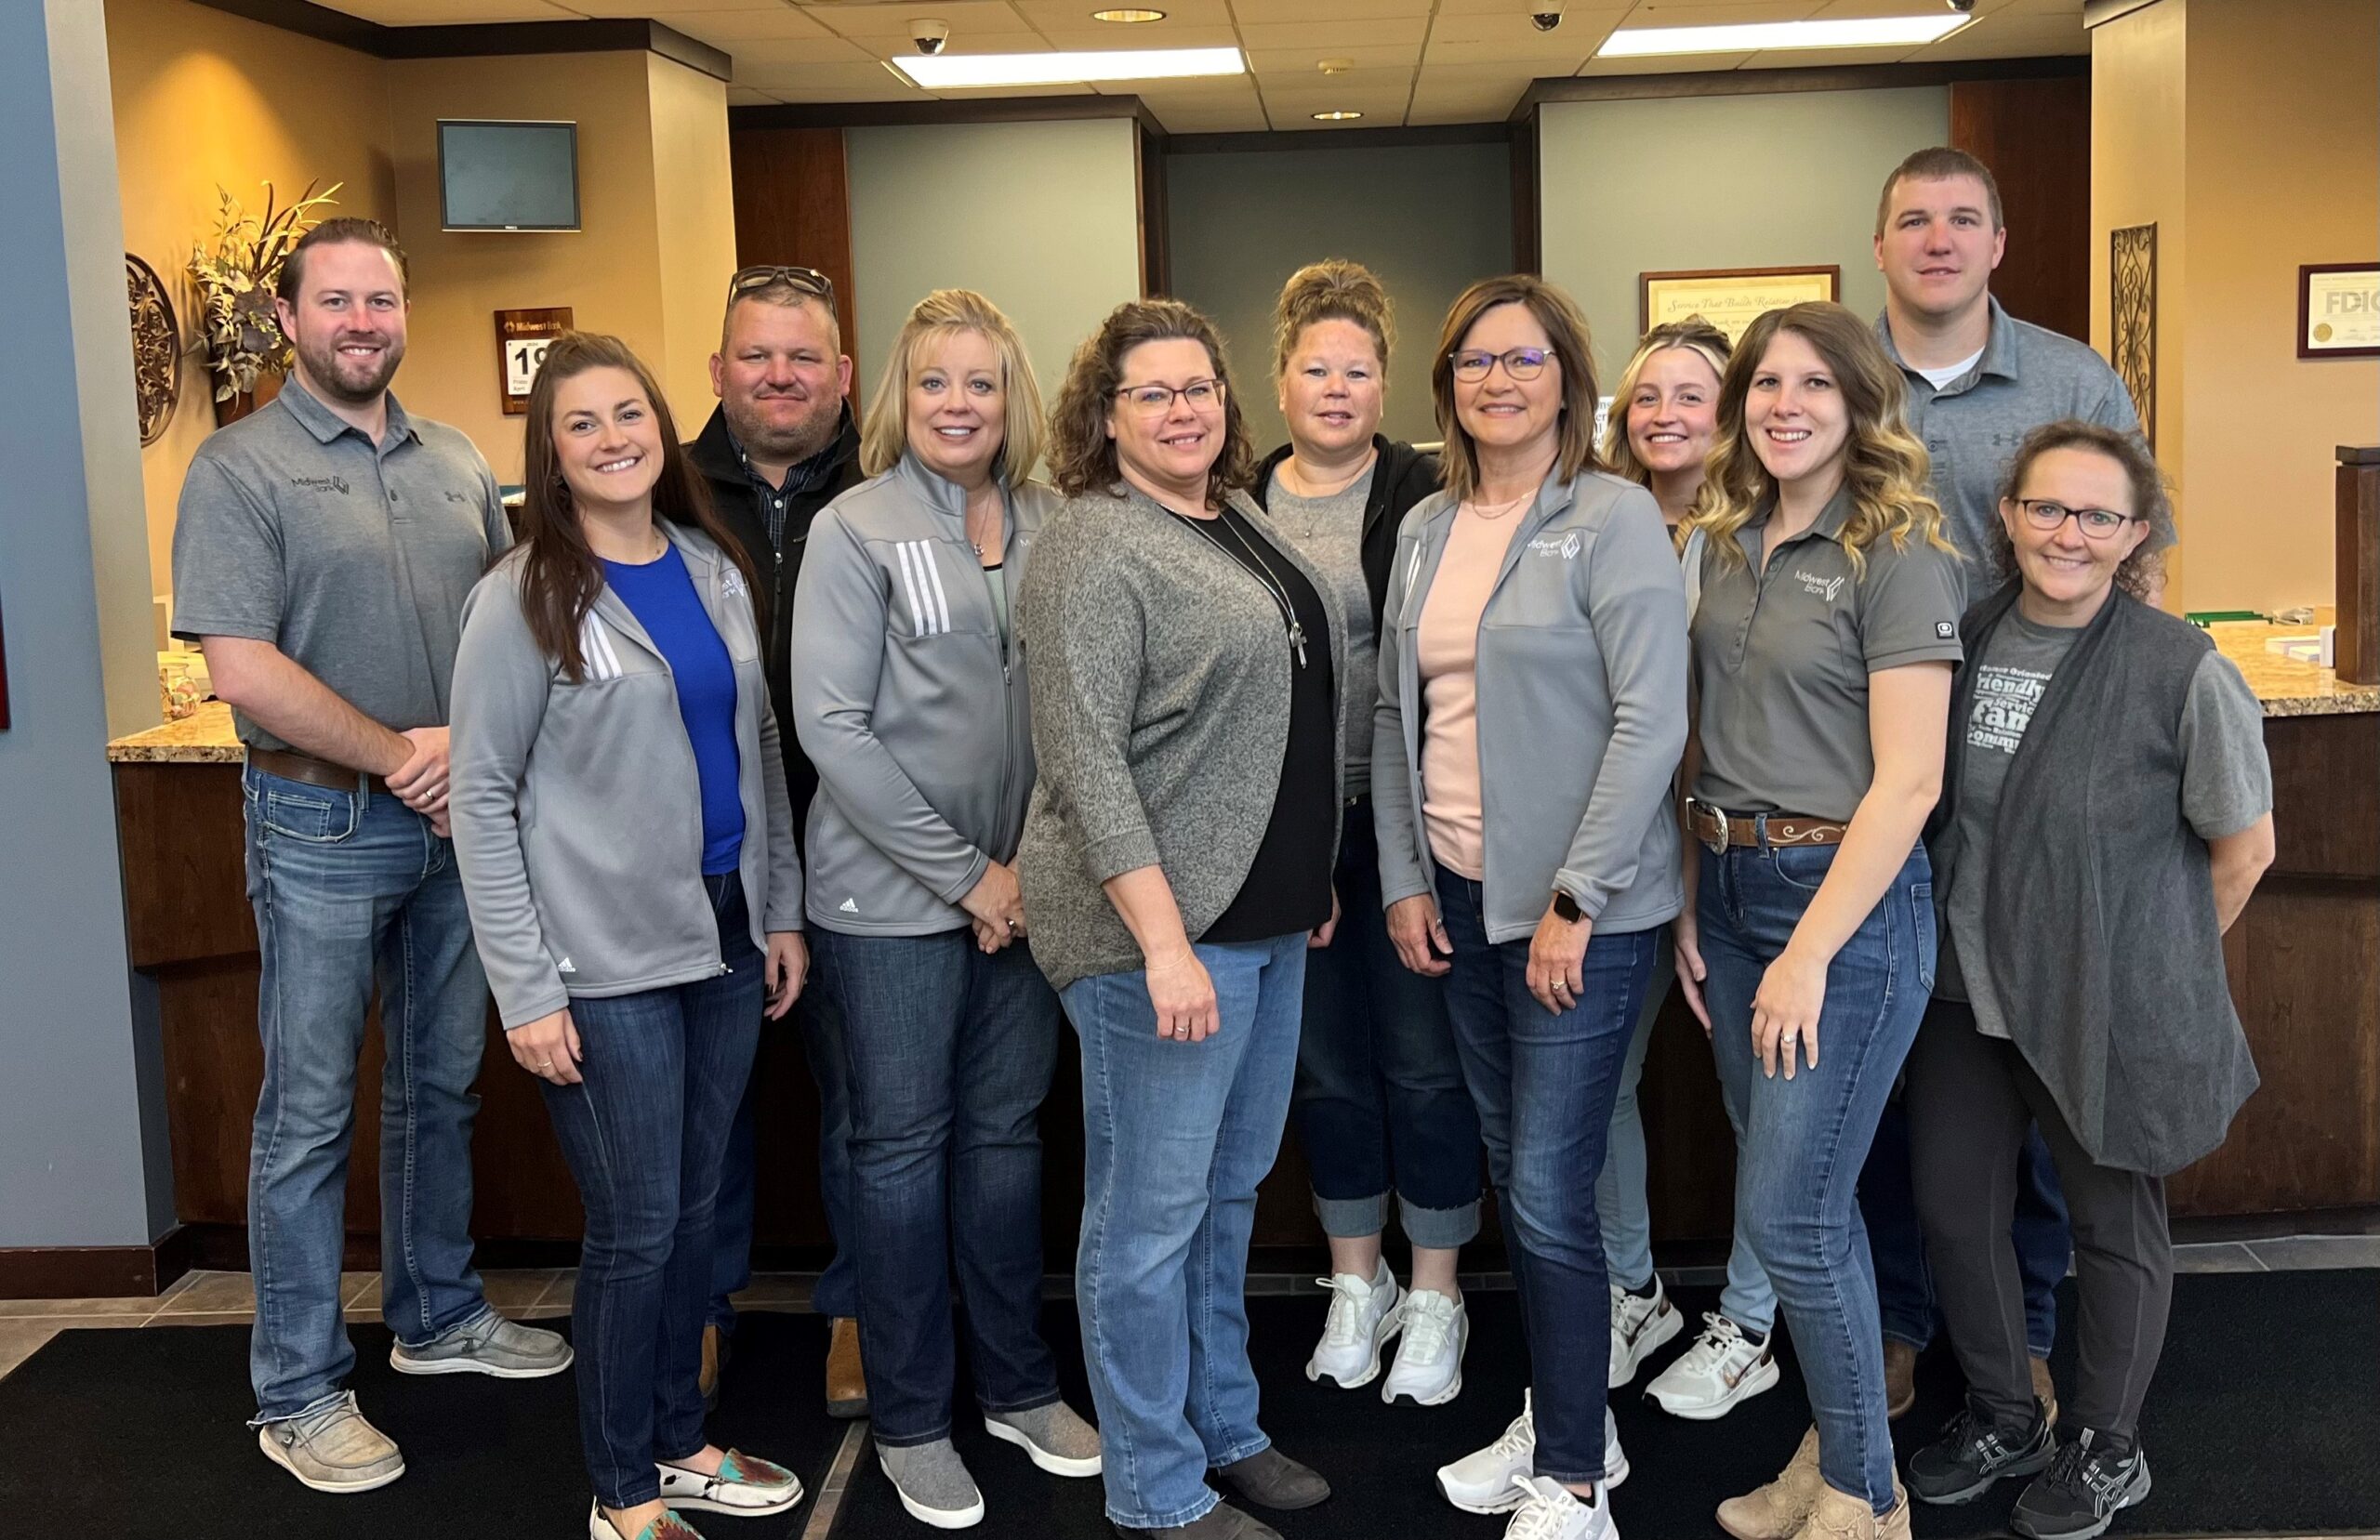 Our team wore grey in honor of Parkinson's Awareness Month.